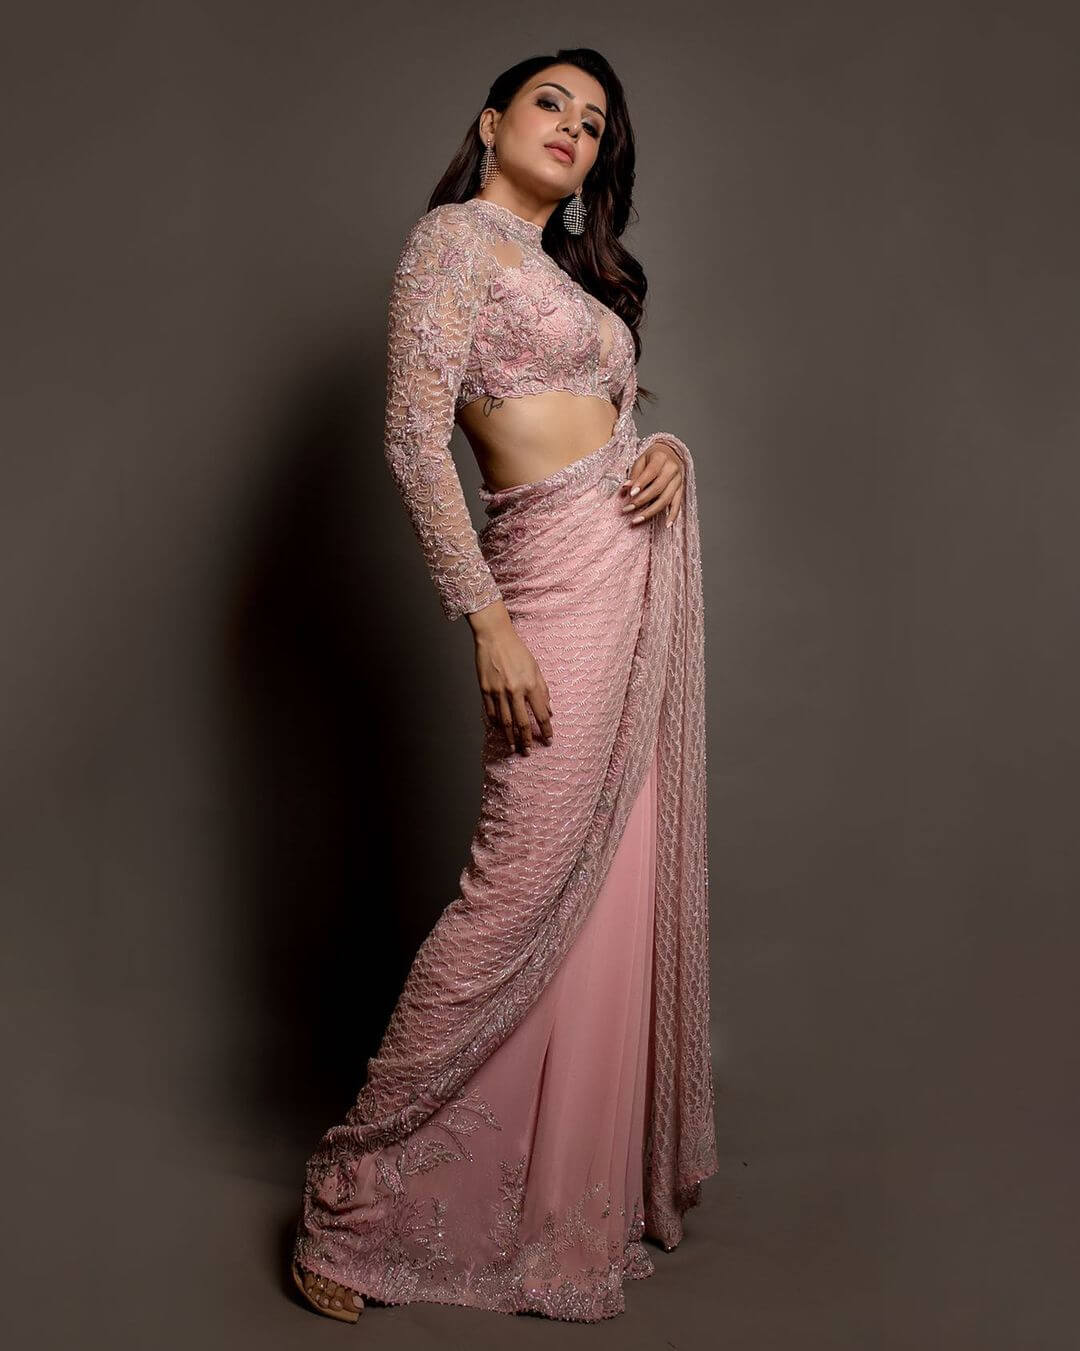 South Indian film industry actress Samantha in sheer pink saree and blouse